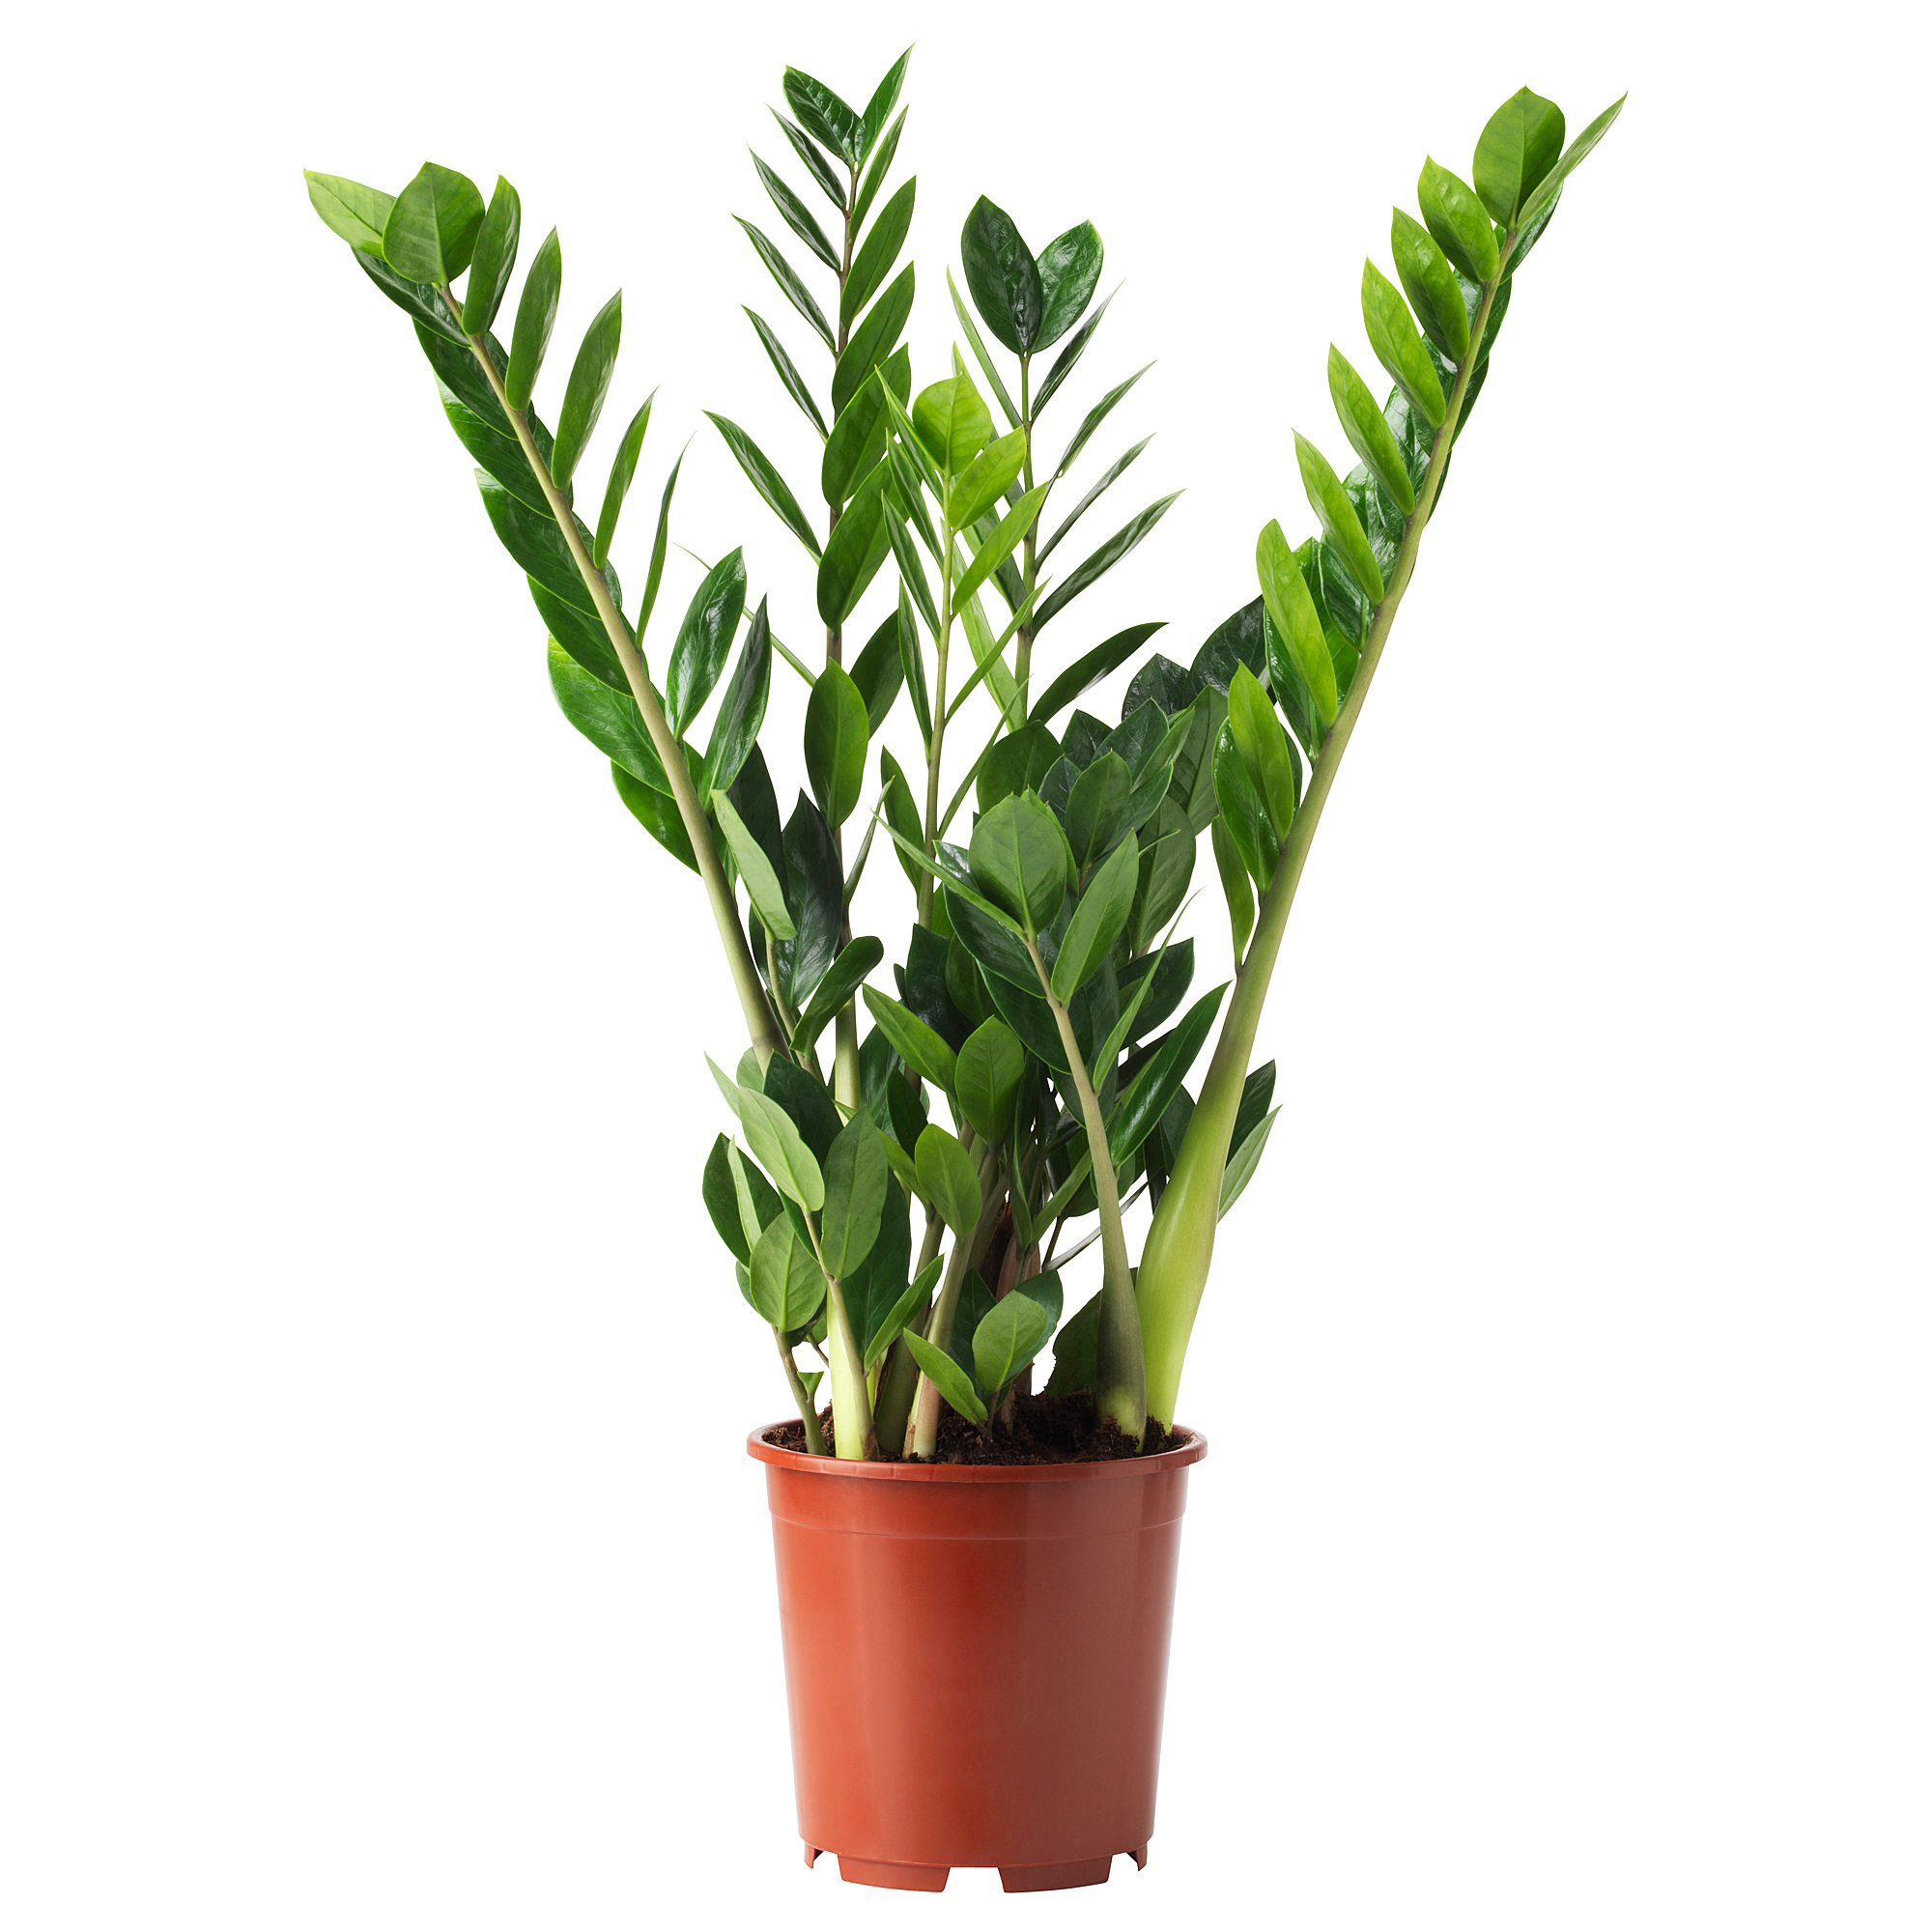 ZAMIOCULCAS potted plant